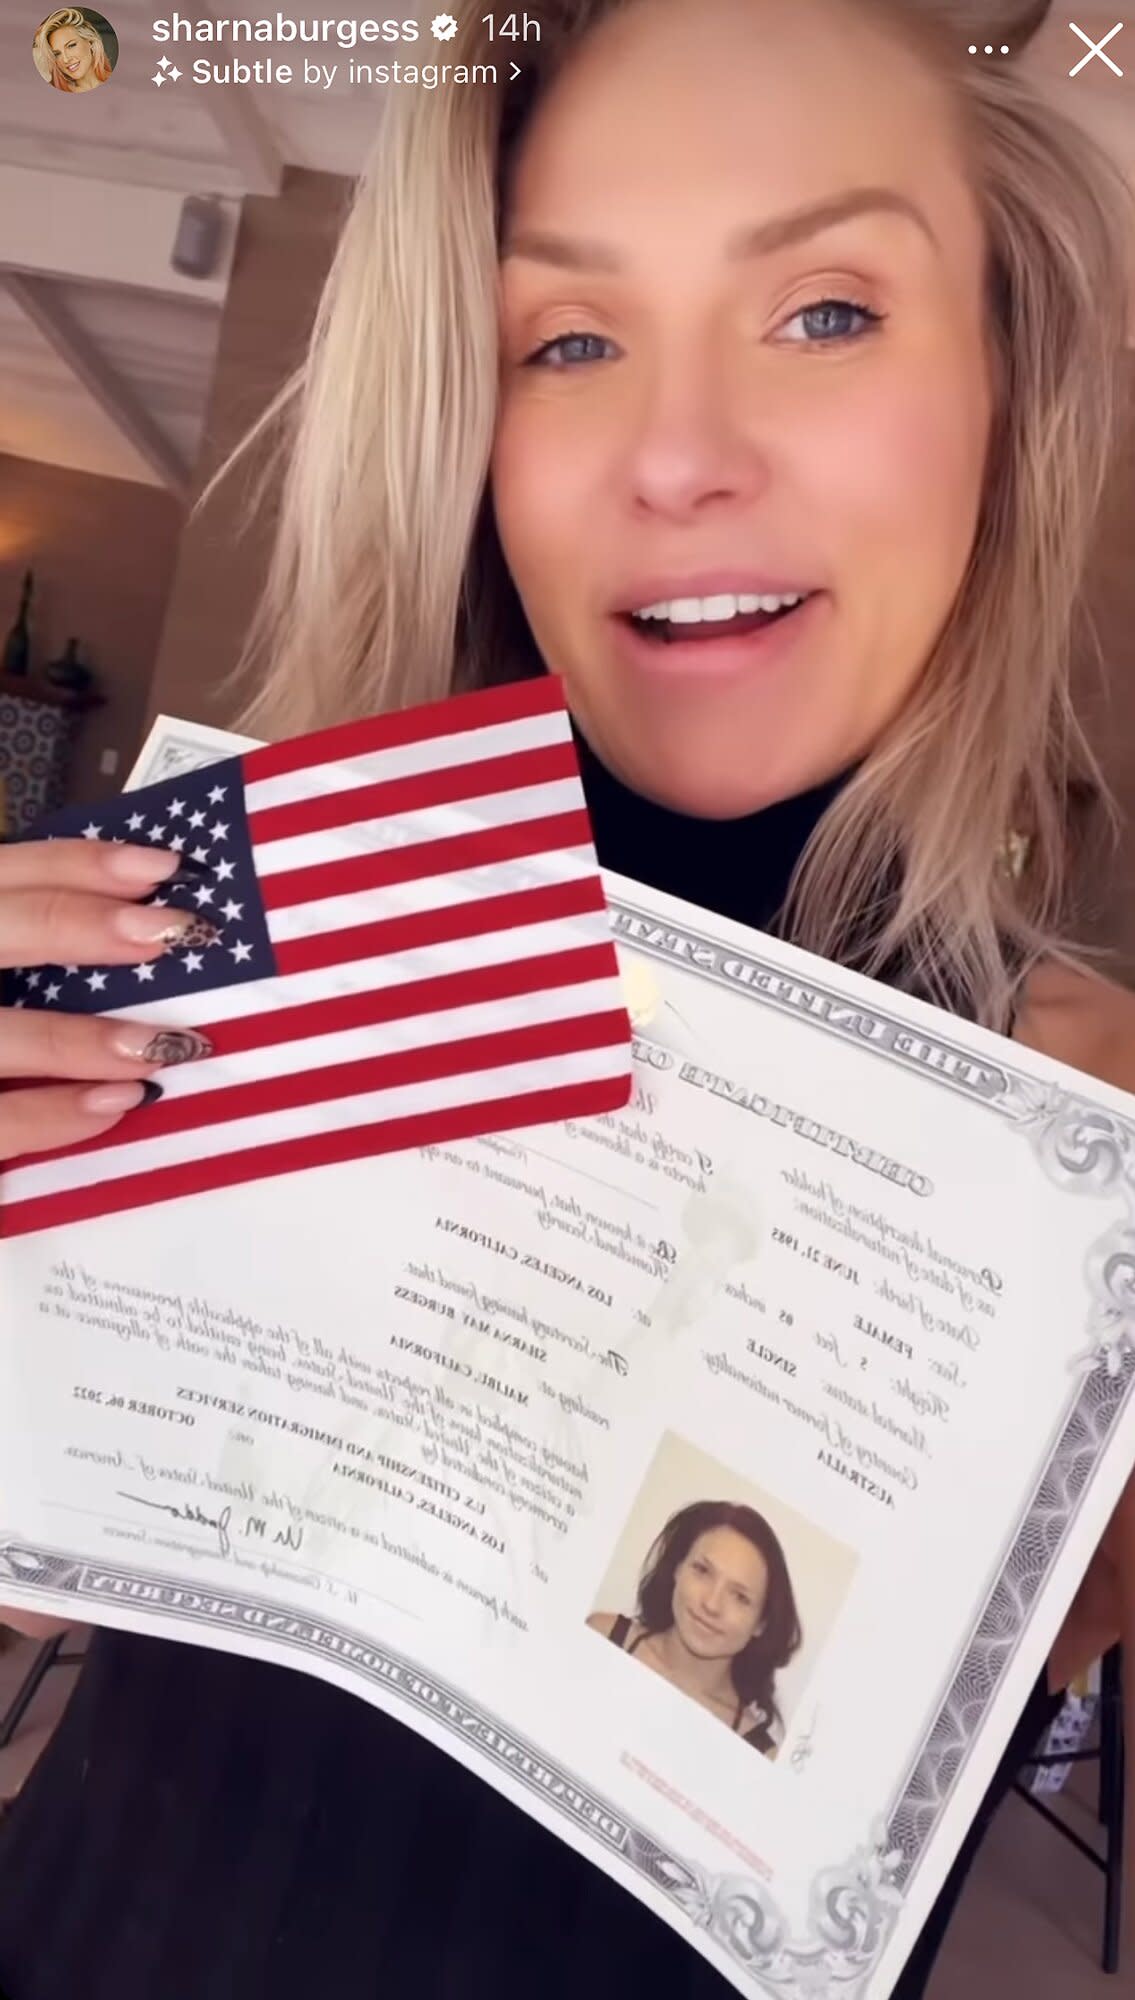 Sharna Burgess Becomes U.S. Citizen in ‘Emotional’ Ceremony: ‘I Belong Here’